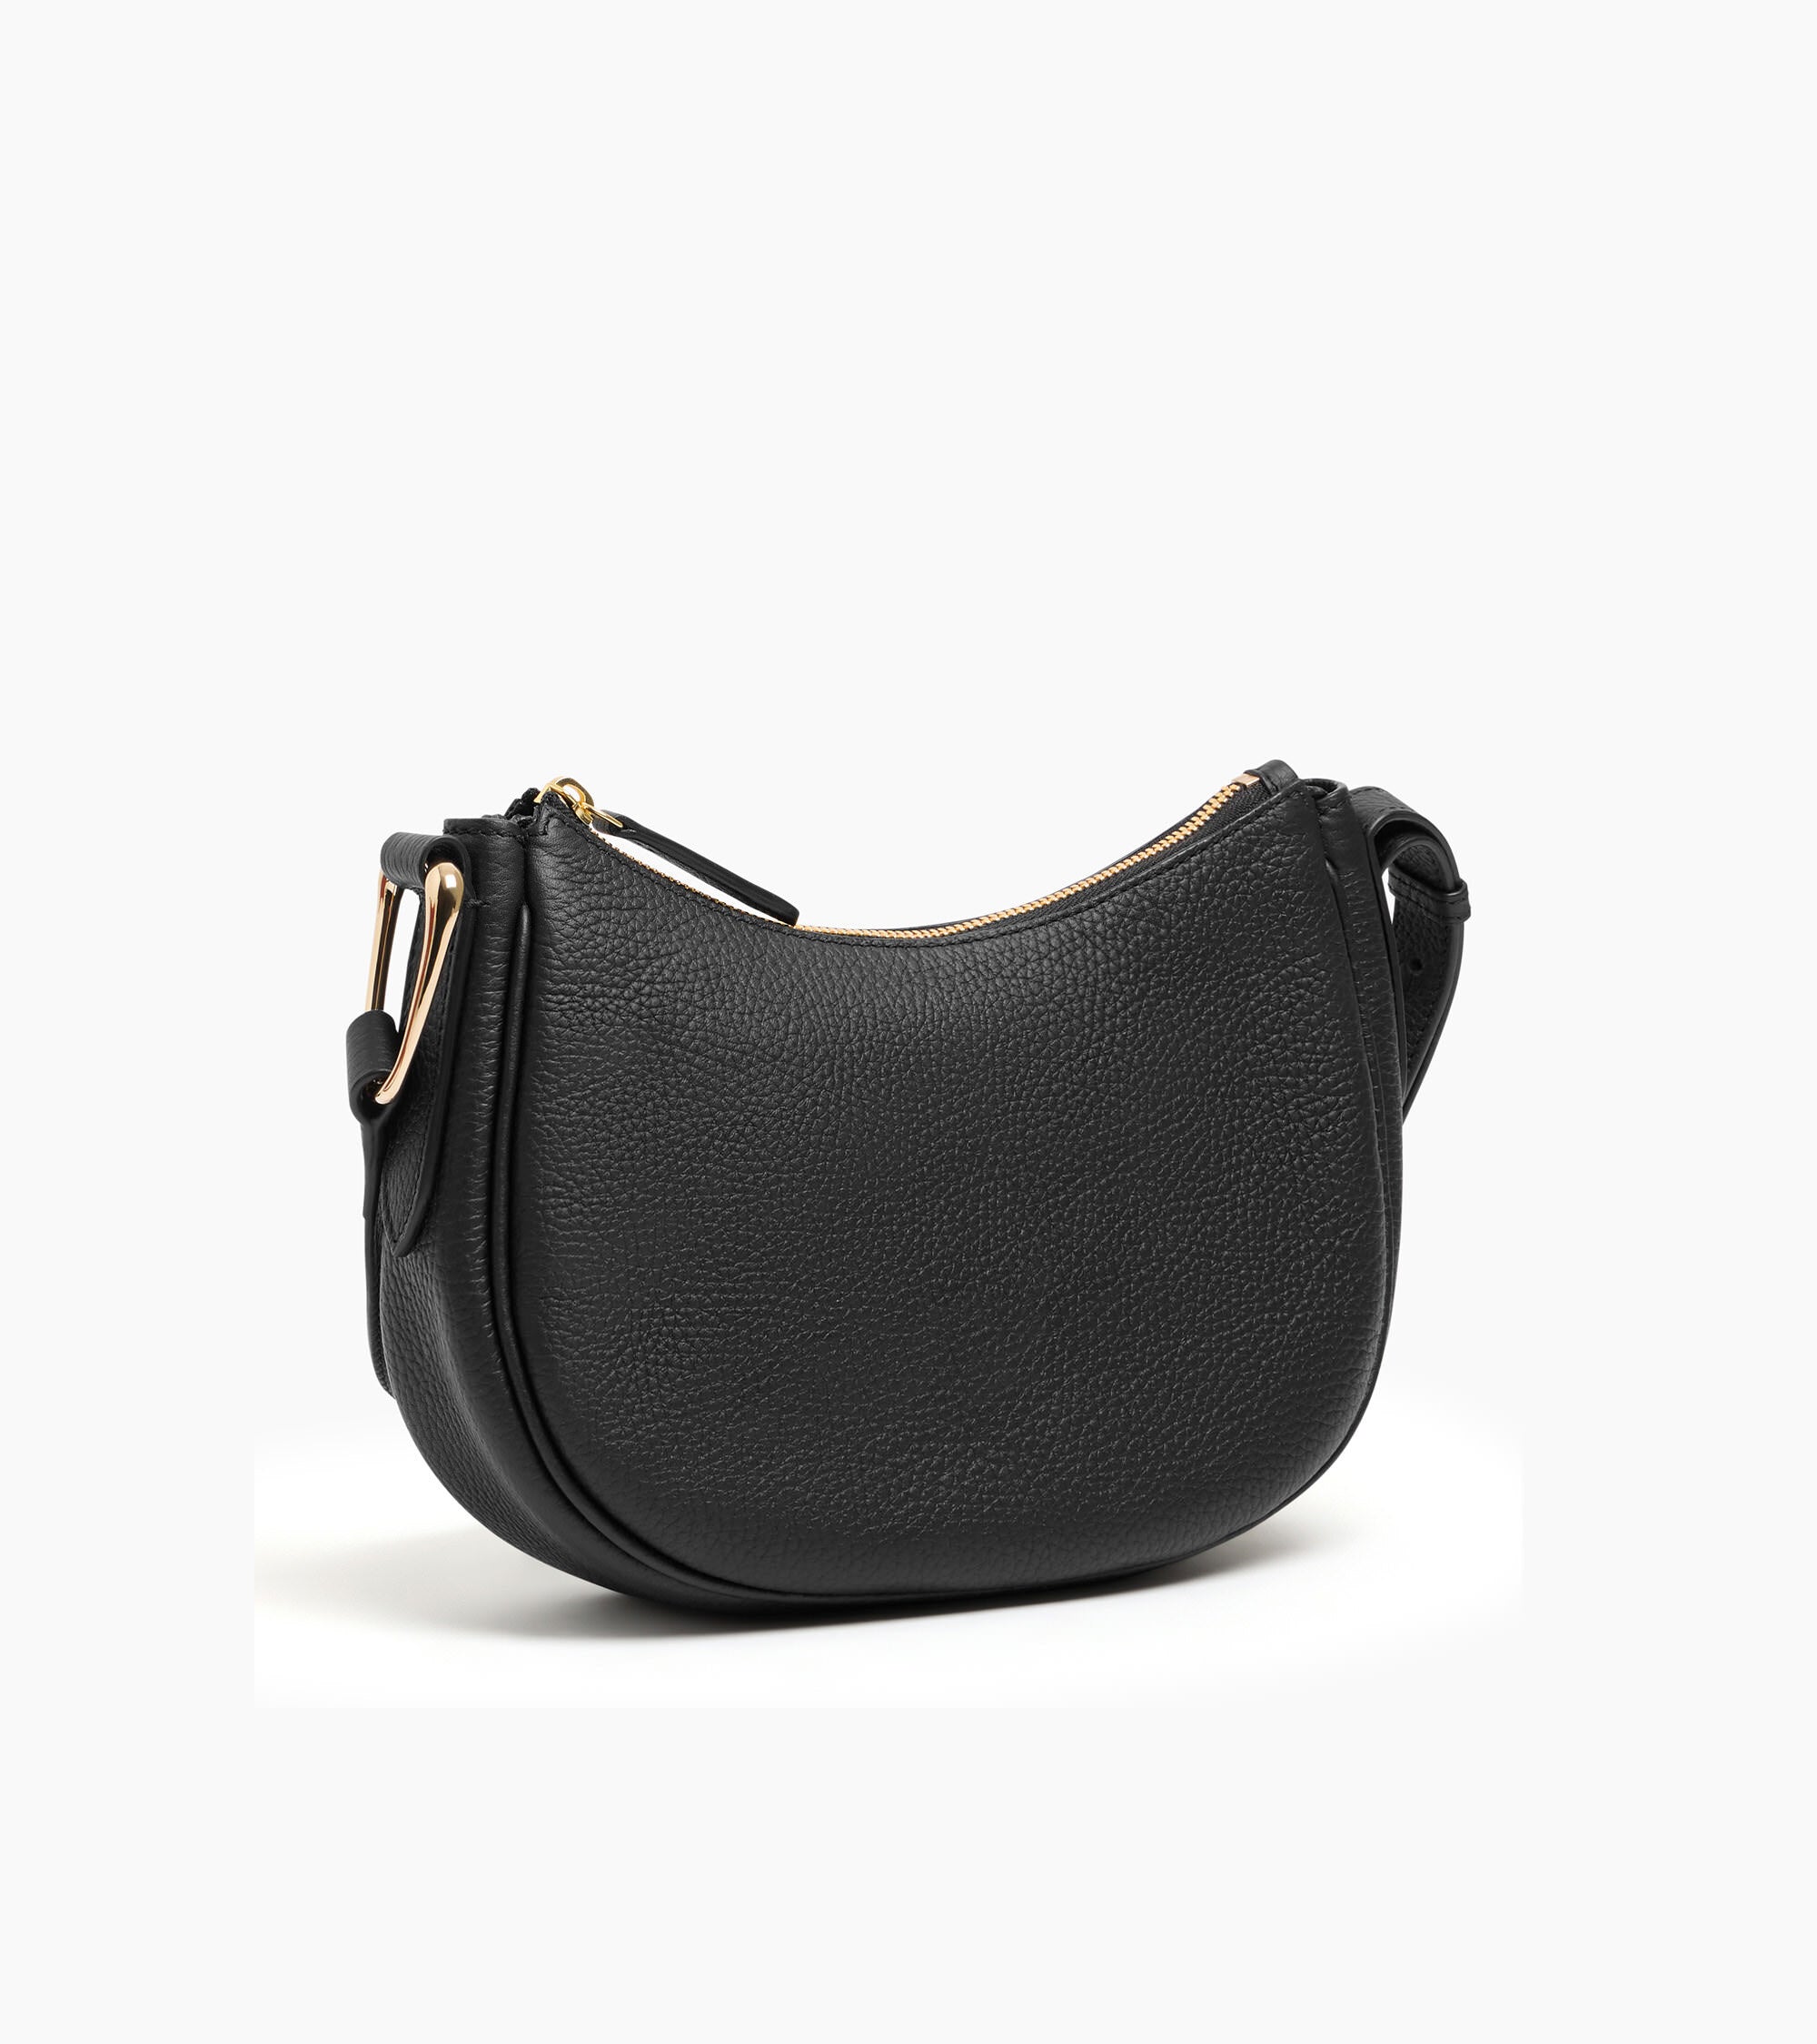 Madeleine small shoulder bag in grained leather